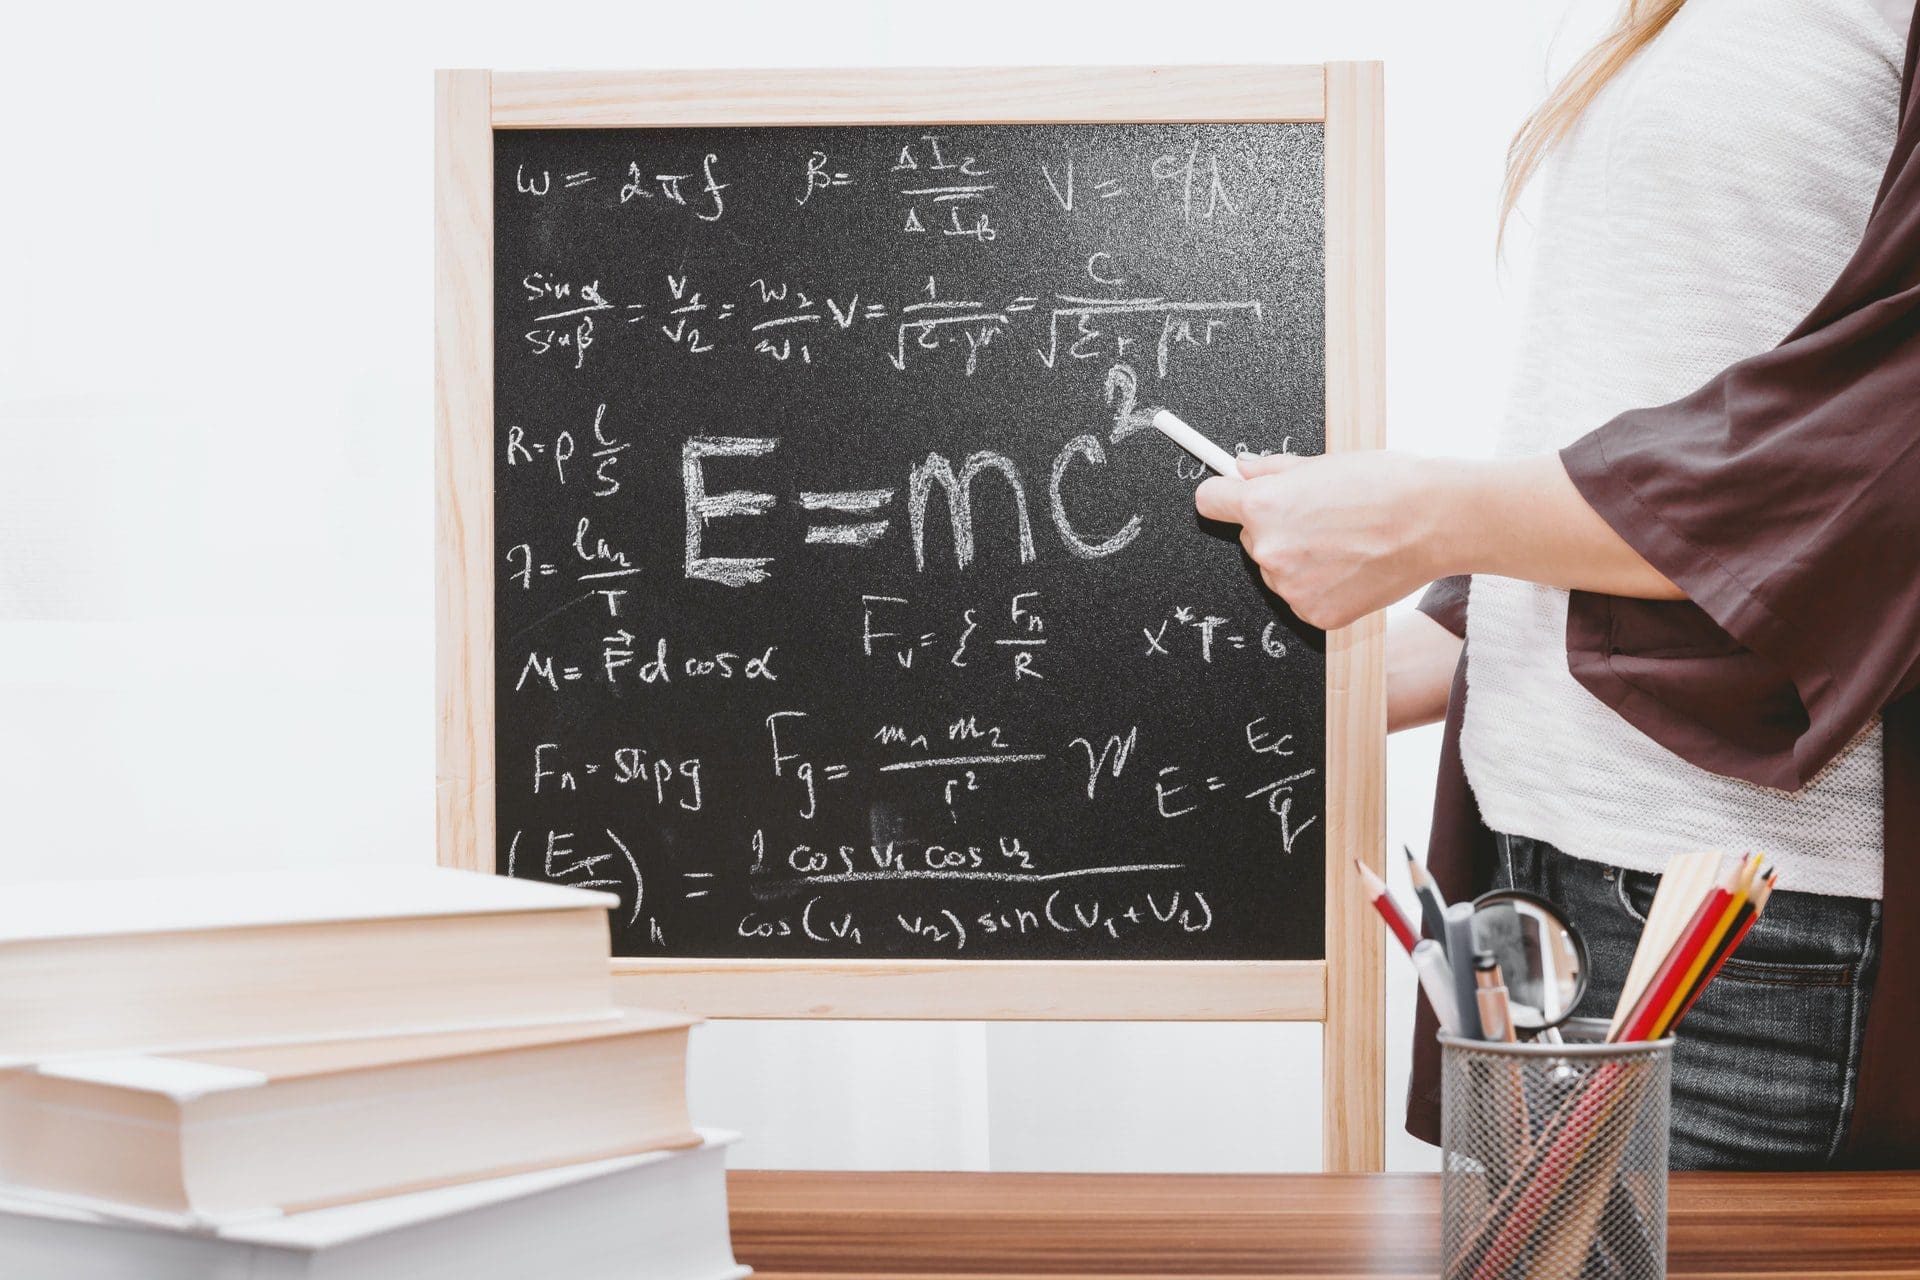 6 Ideas for Getting Your Gen Z Students Interested in A Math Career